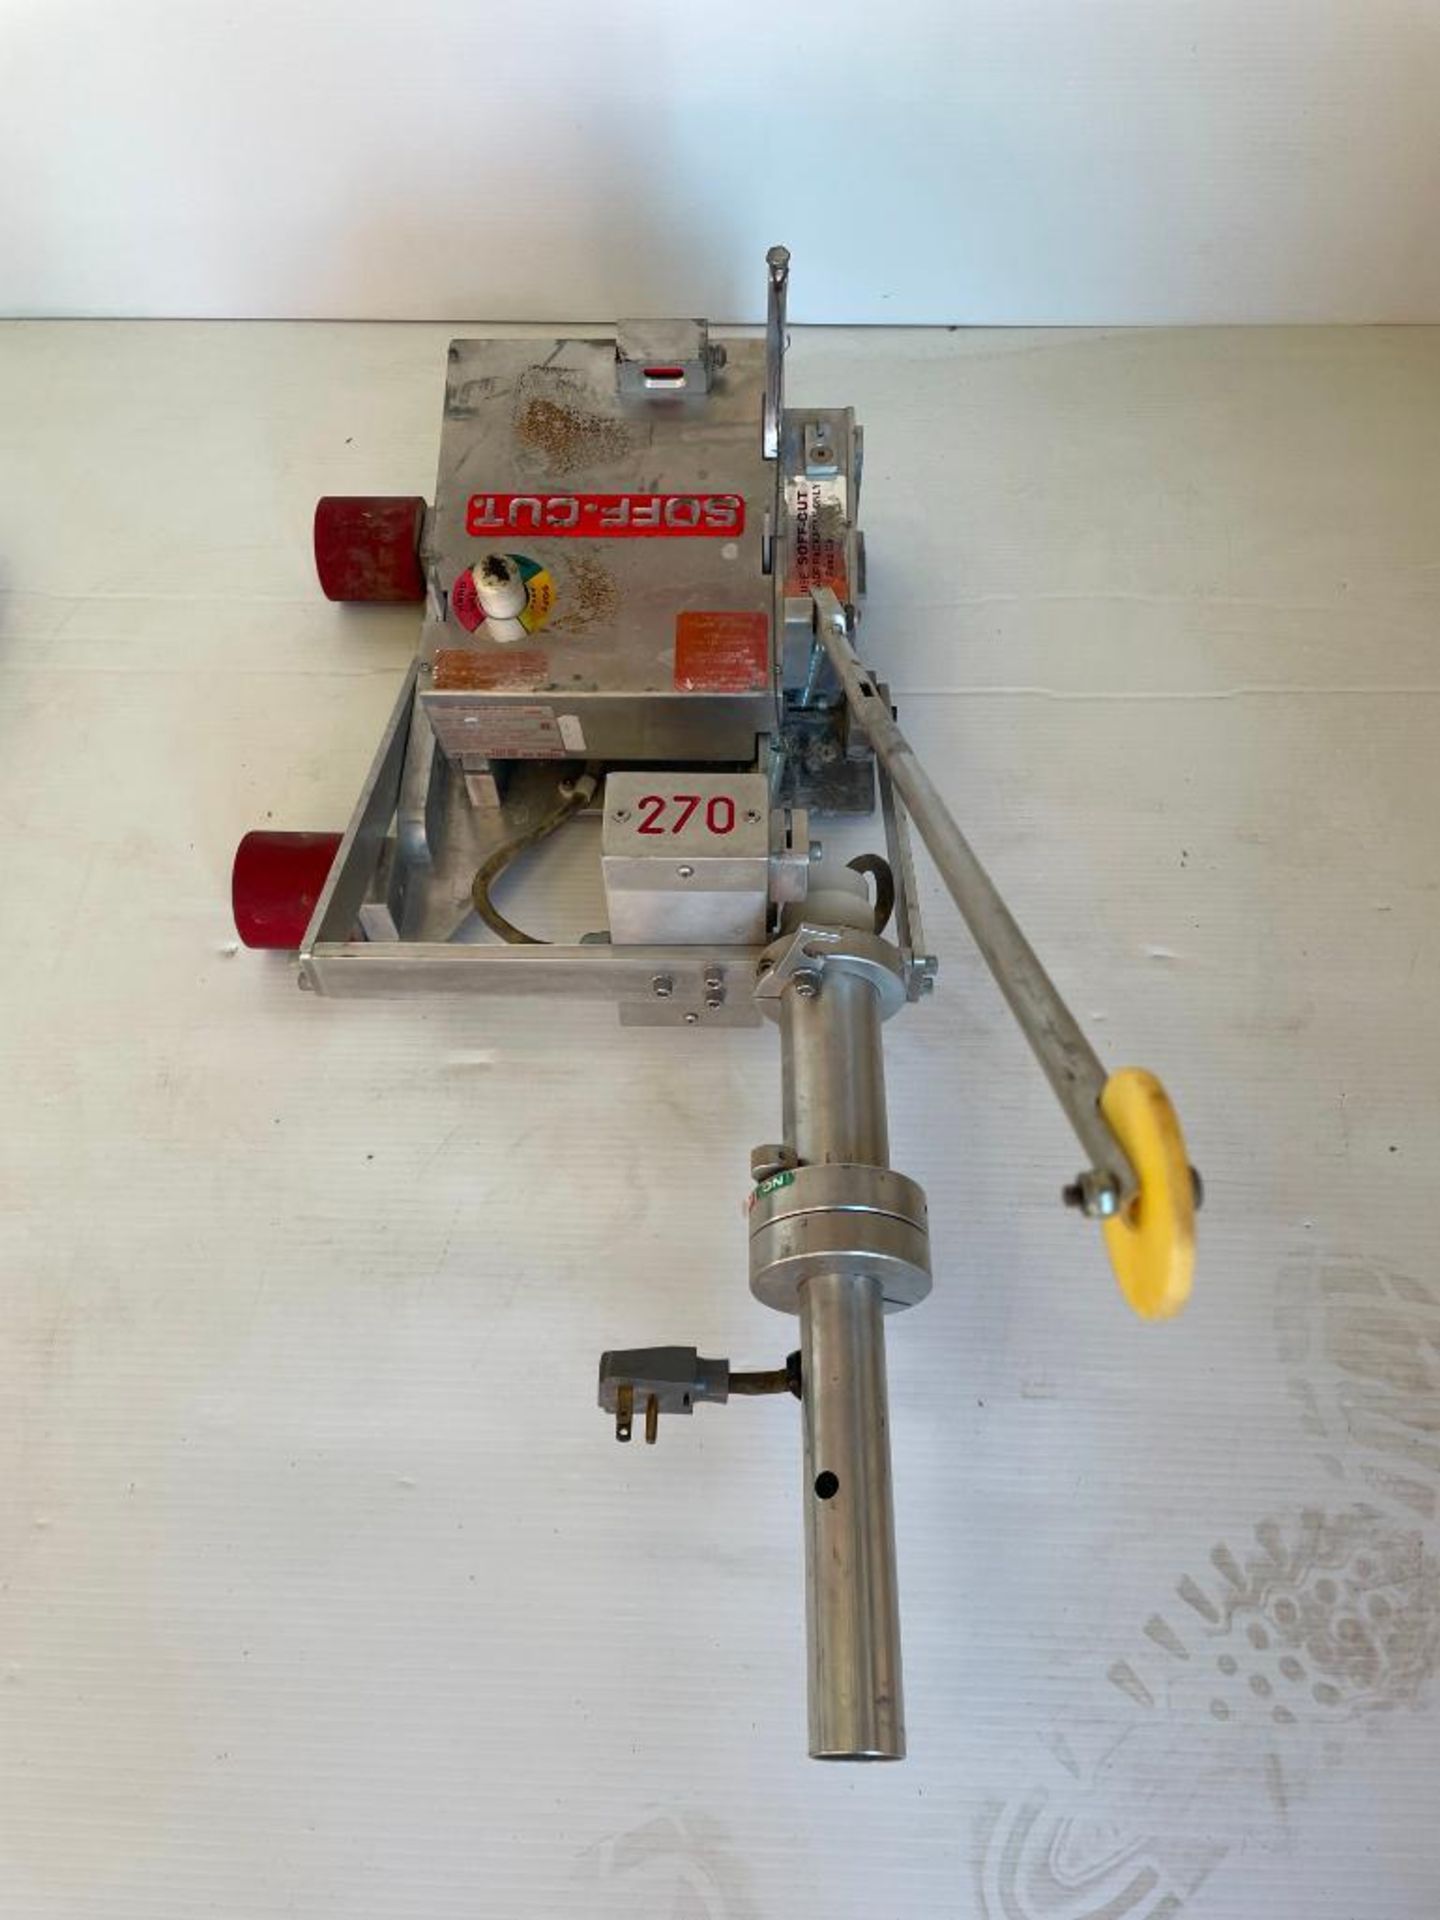 SoffCut 270 Concrete Saw, Serial #6237. Located in Hazelwood, MO. - Image 5 of 9